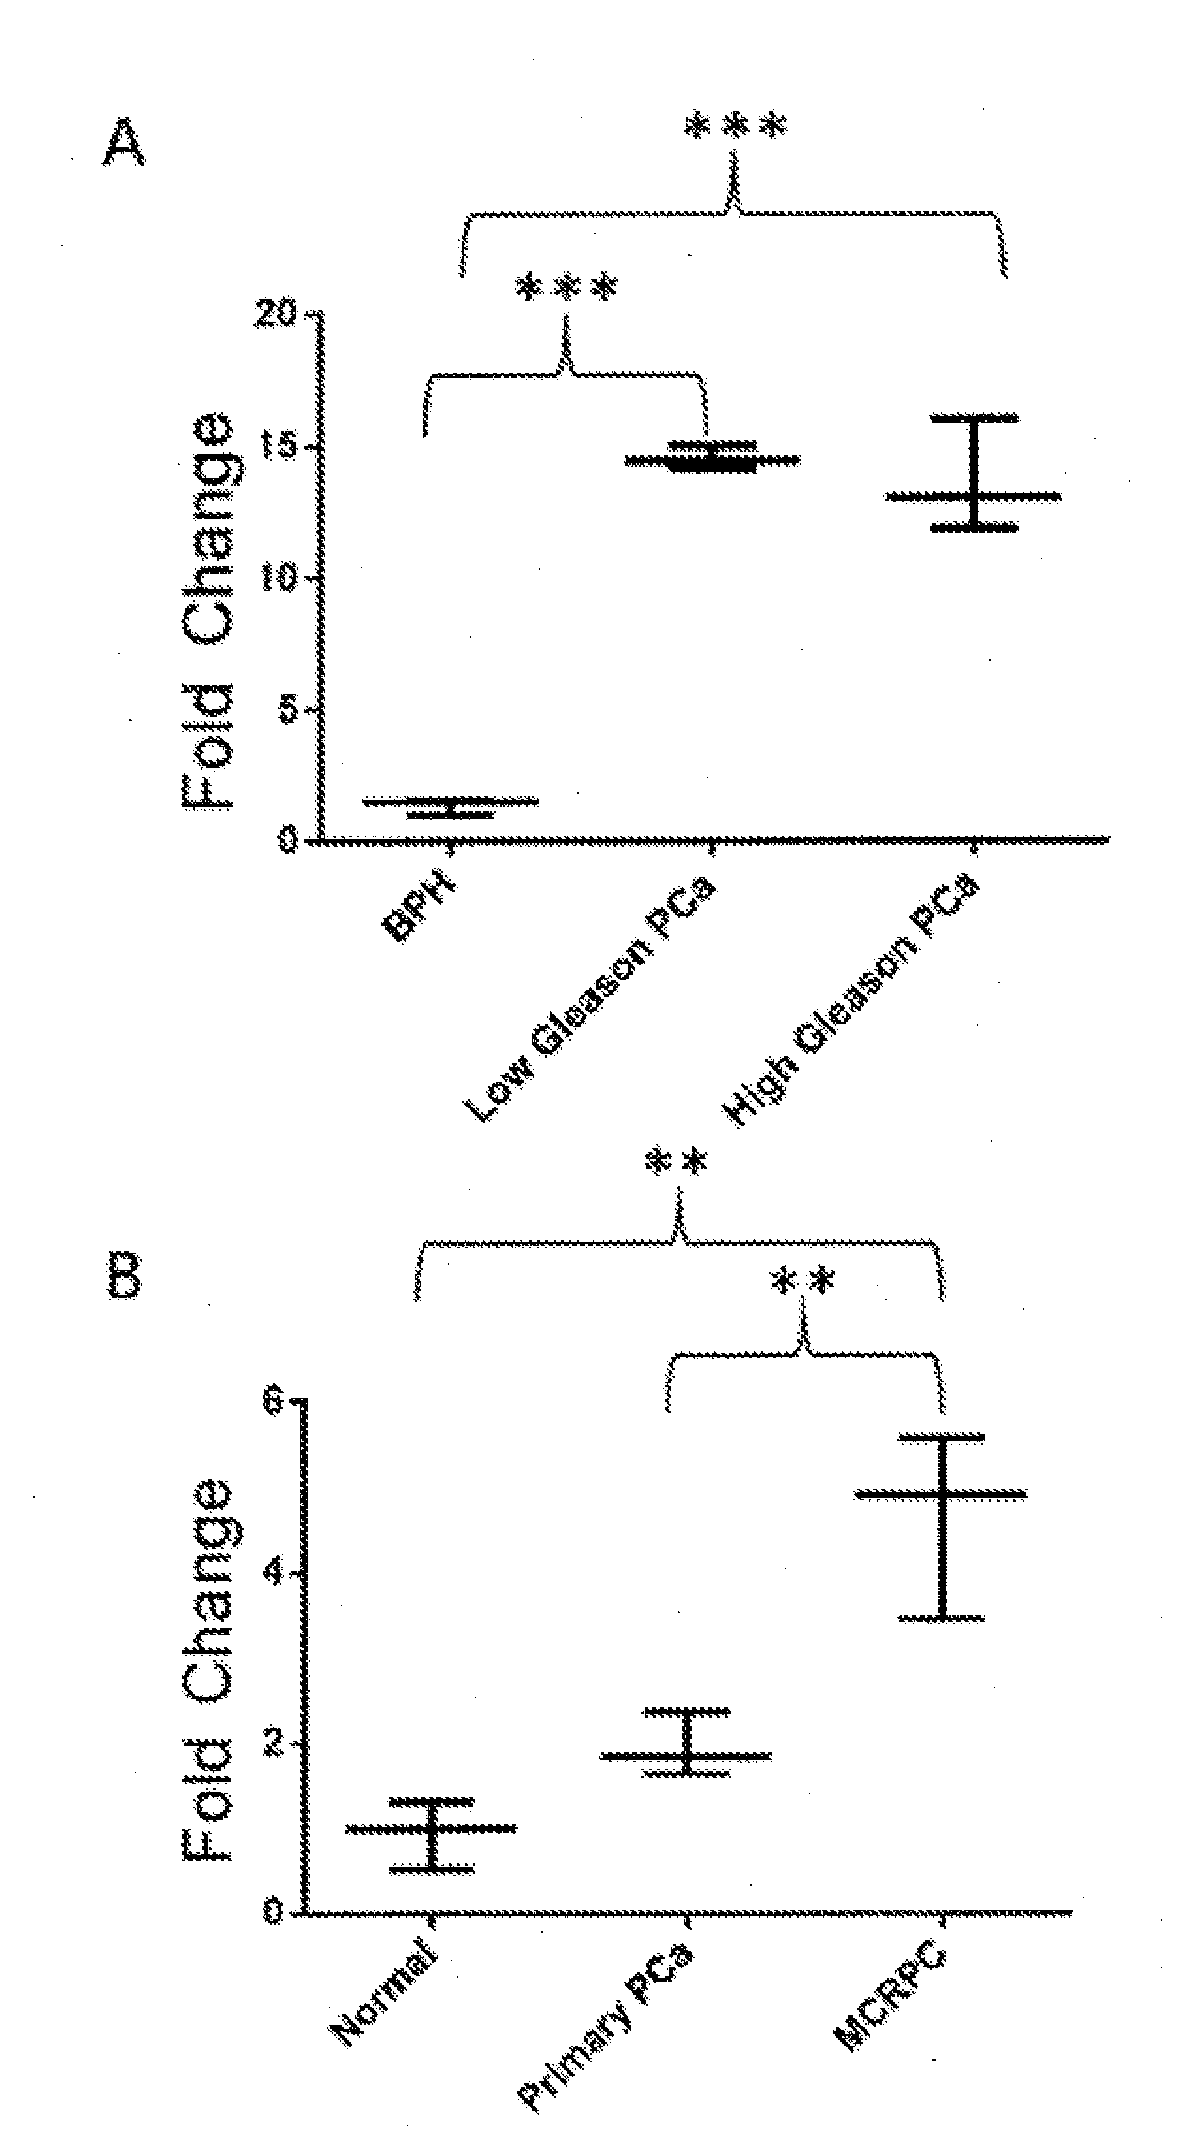 Methods and uses for diagnosis and treatment of prostate cancer